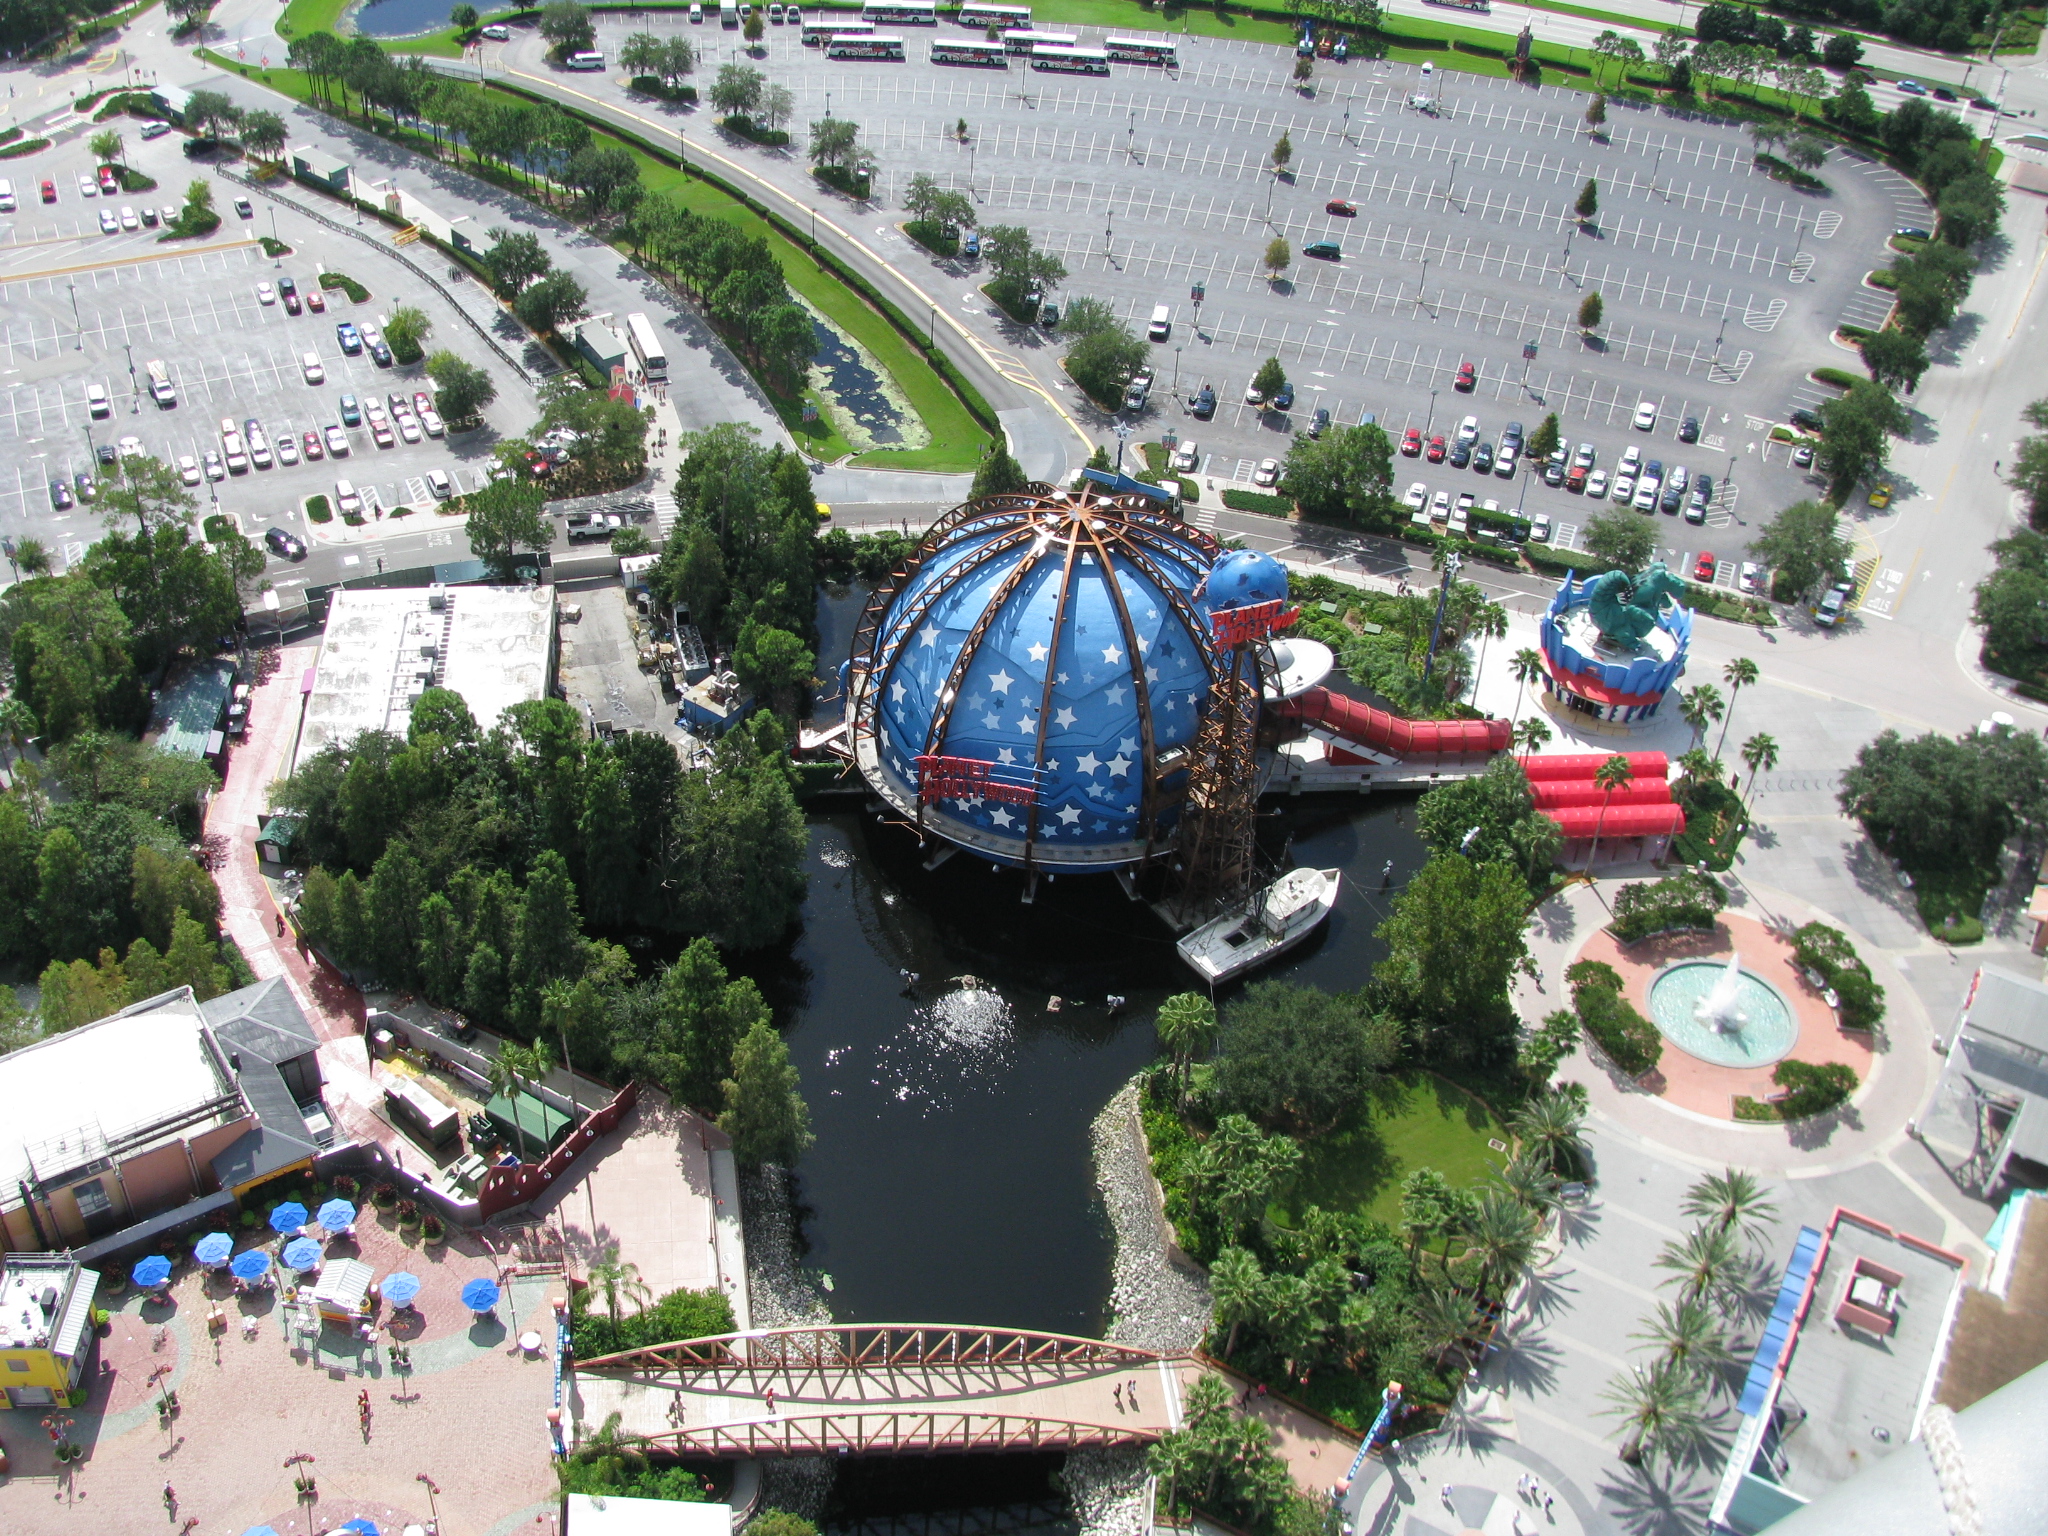 Planet Hollywood Orlando from above